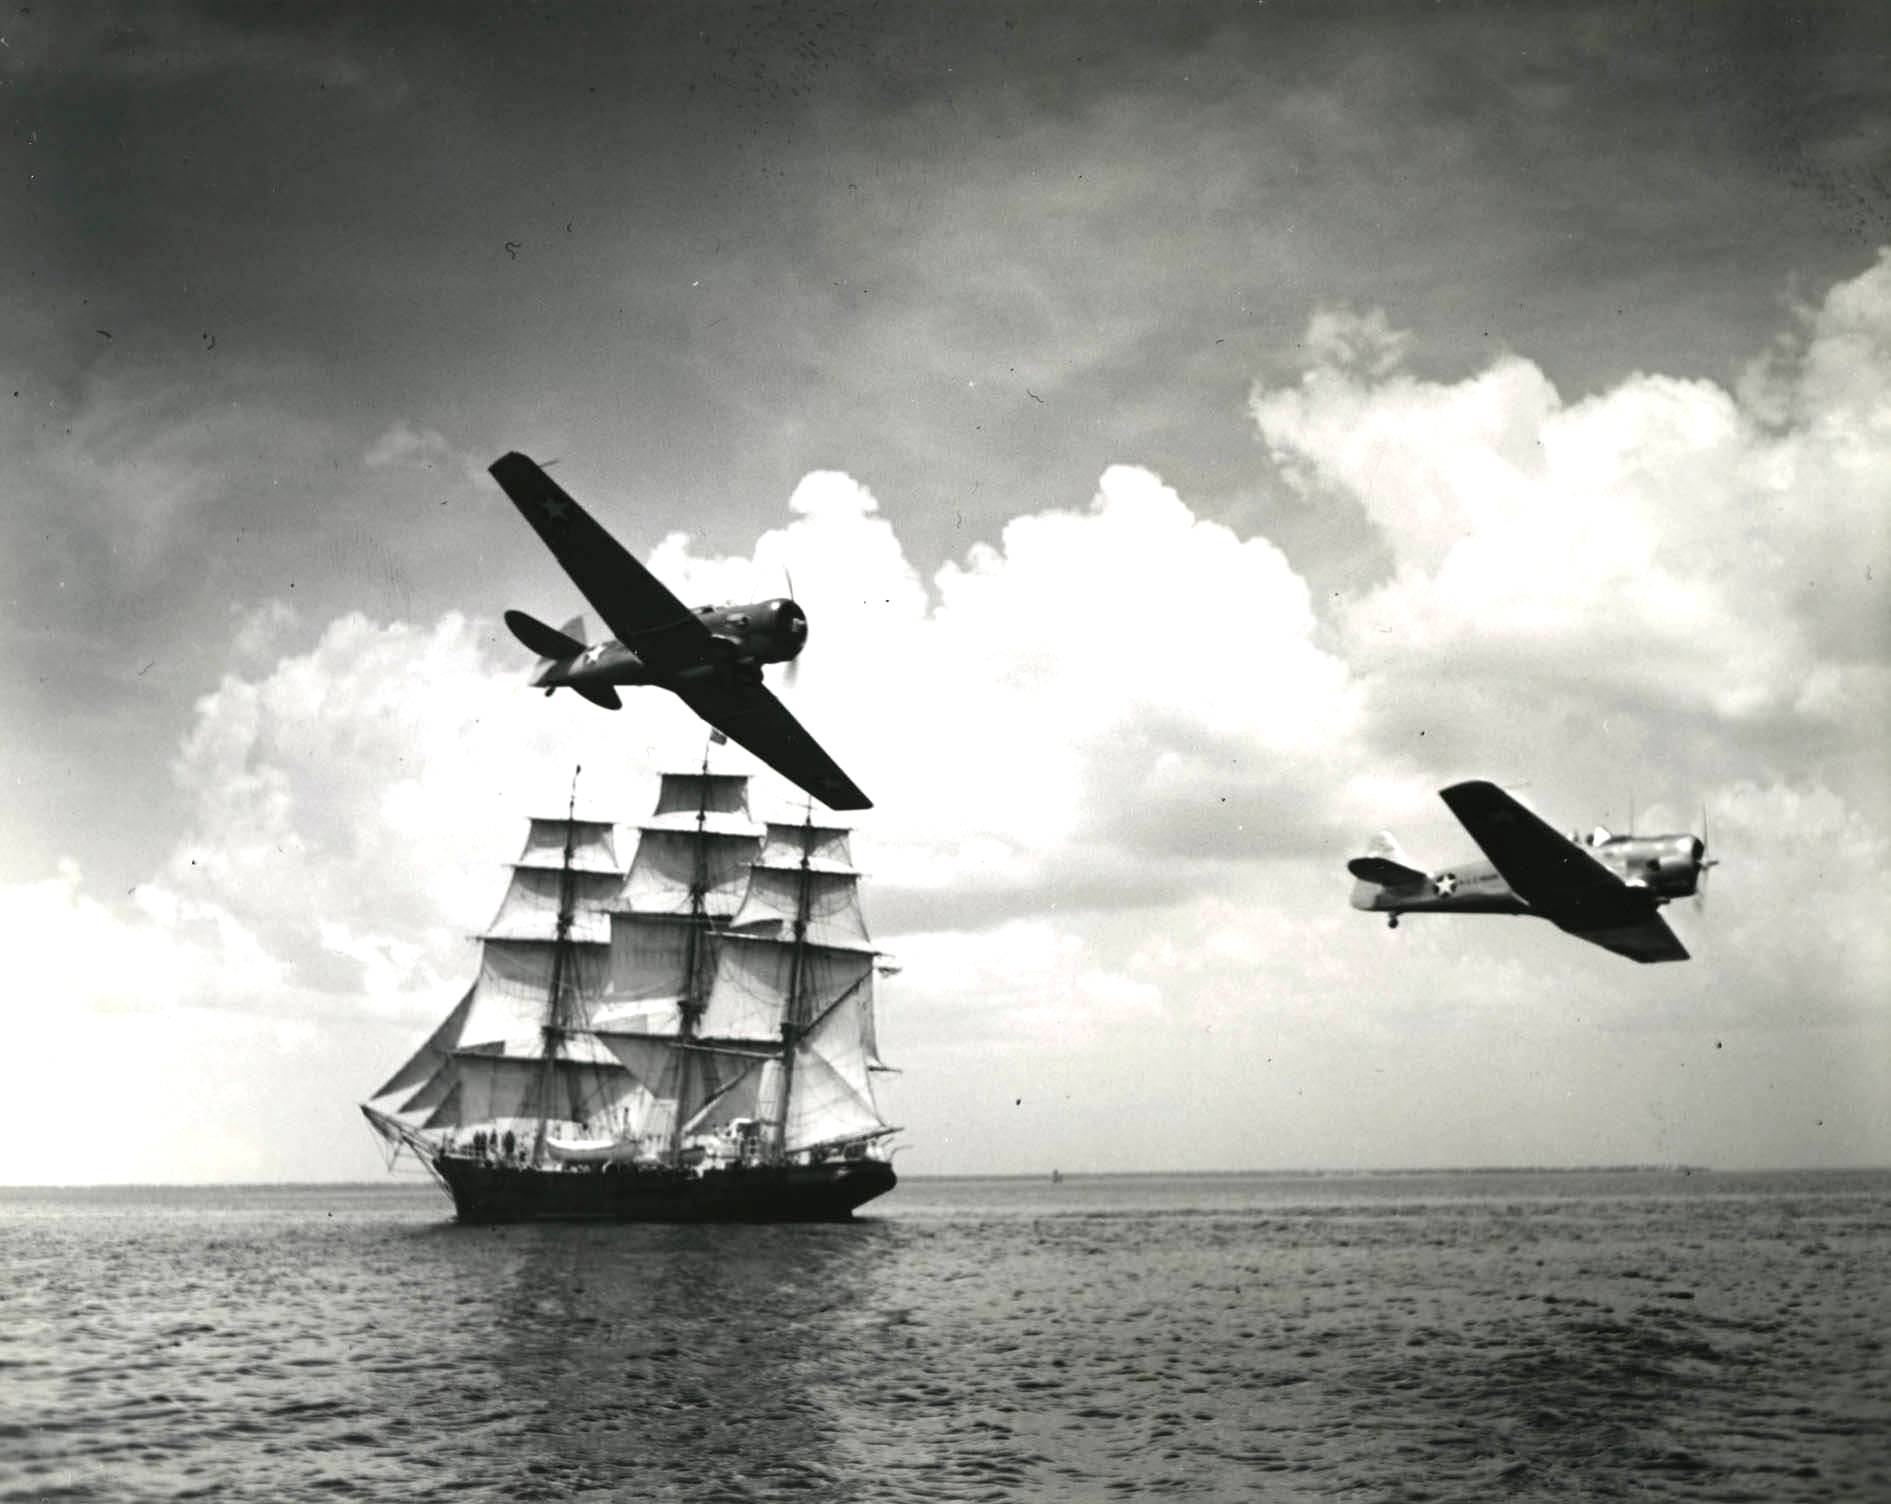 US Navy SNJ Texan training aircraft making a low level pass near a three-masted sailing ship, probably along the east coast of the United States, 1942